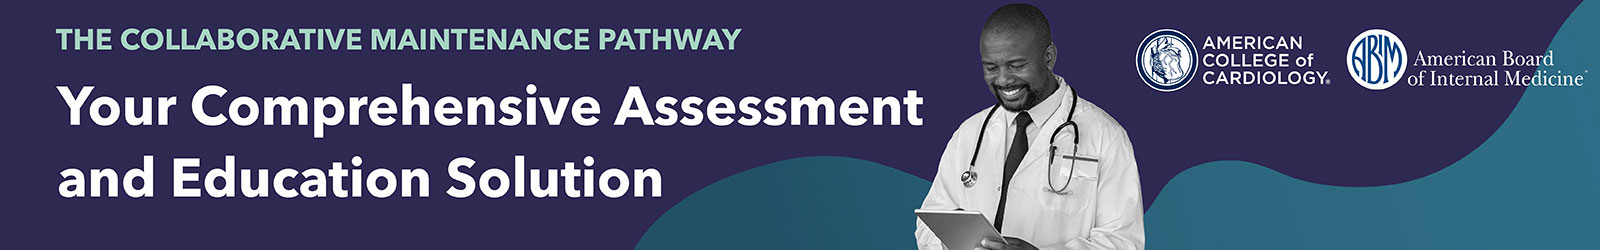 The Collaborative Maintenance Pathway: Your Comprehensive Assessment and Education Solution